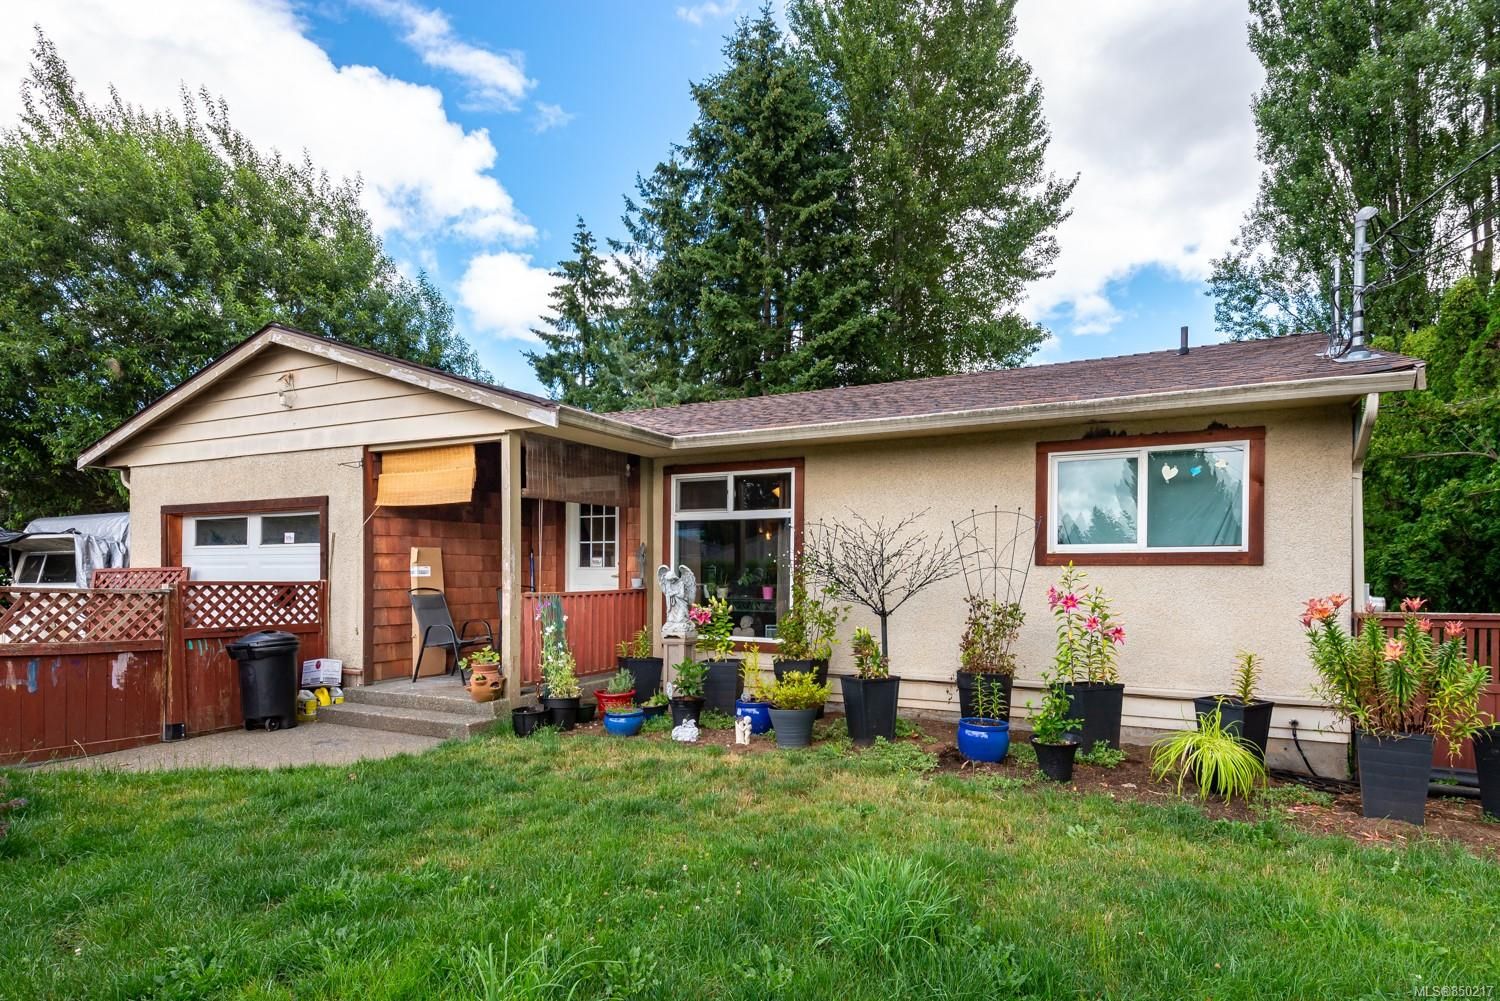 Main Photo: 1750 Willemar Ave in Courtenay: CV Courtenay City House for sale (Comox Valley)  : MLS®# 850217